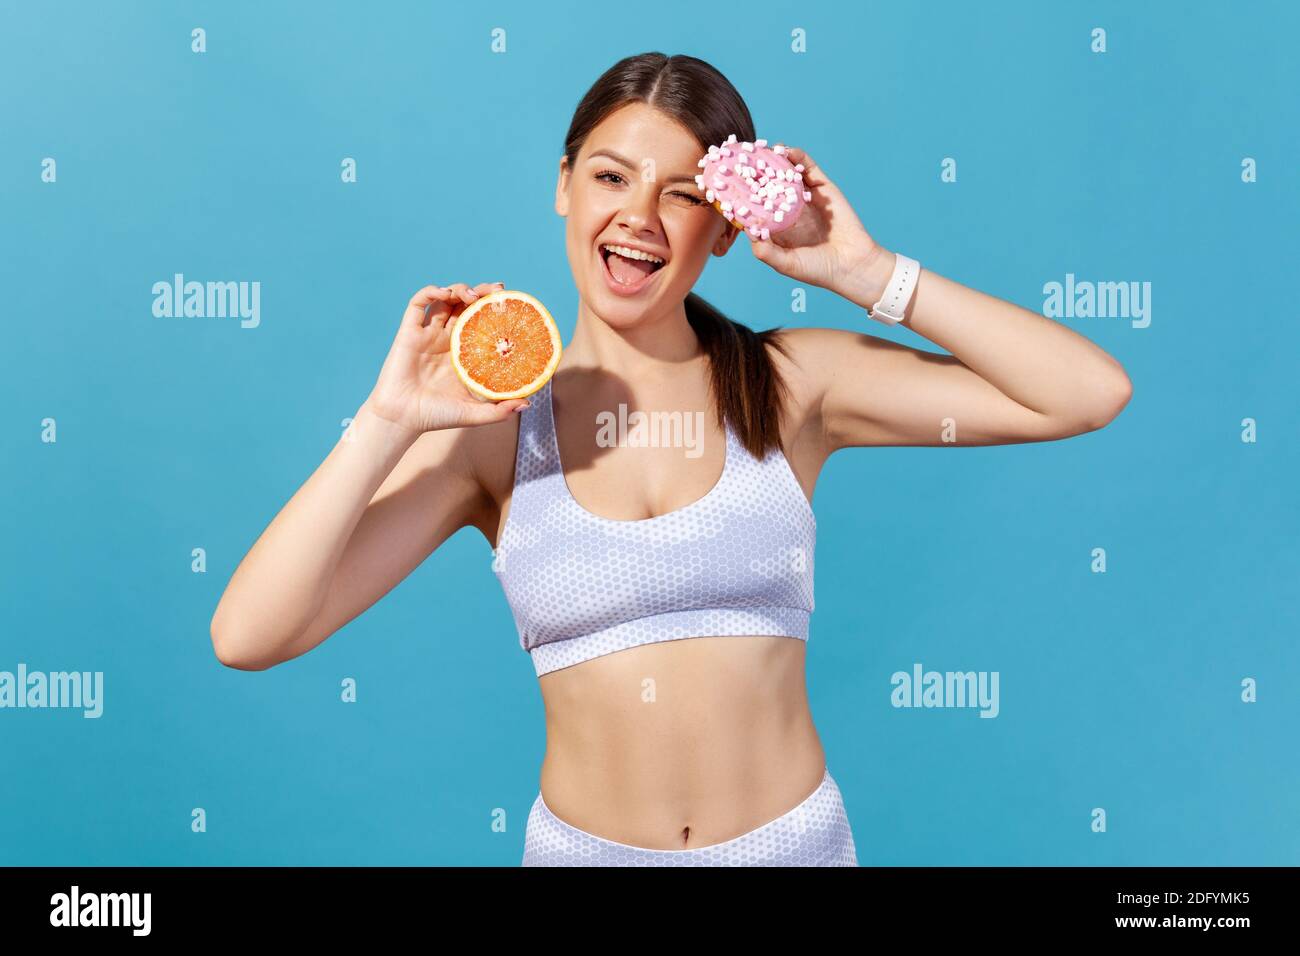 Positive athletic woman in white sportswear holding half of ripe juicy grapefruit and round donut with pink icing, having fun looking camera with smil Stock Photo